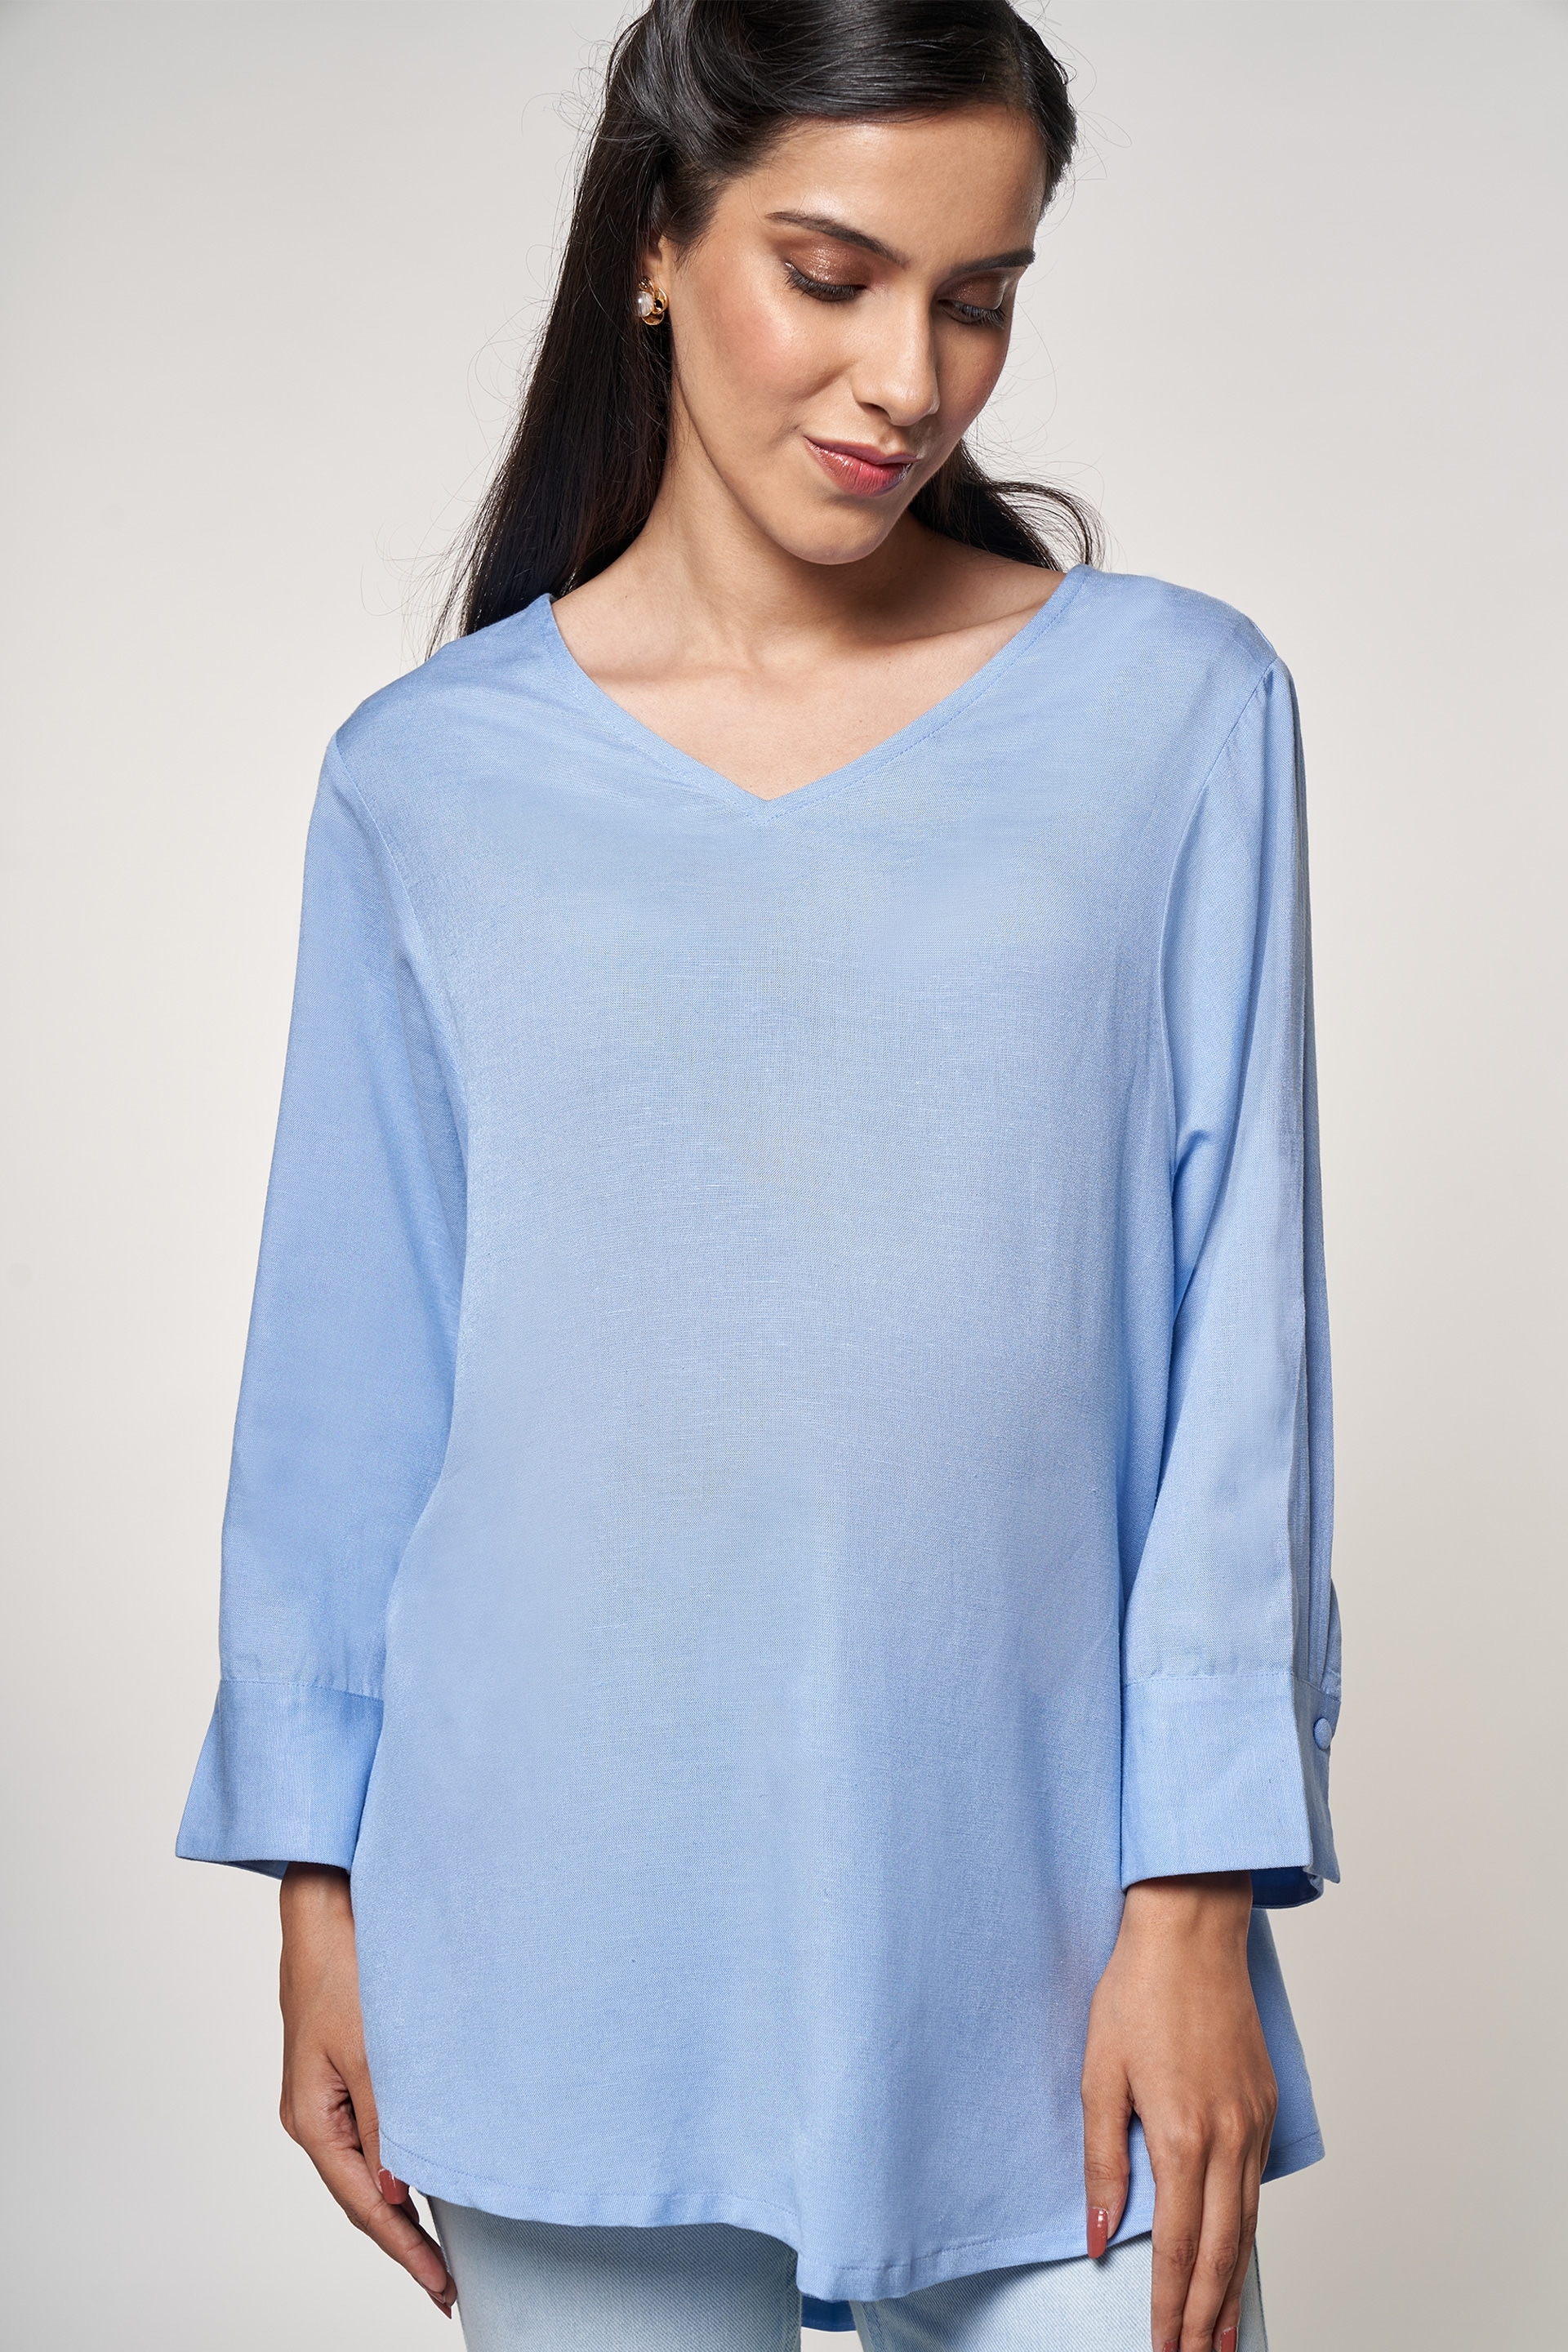 AND | Powder Blue Solid Top